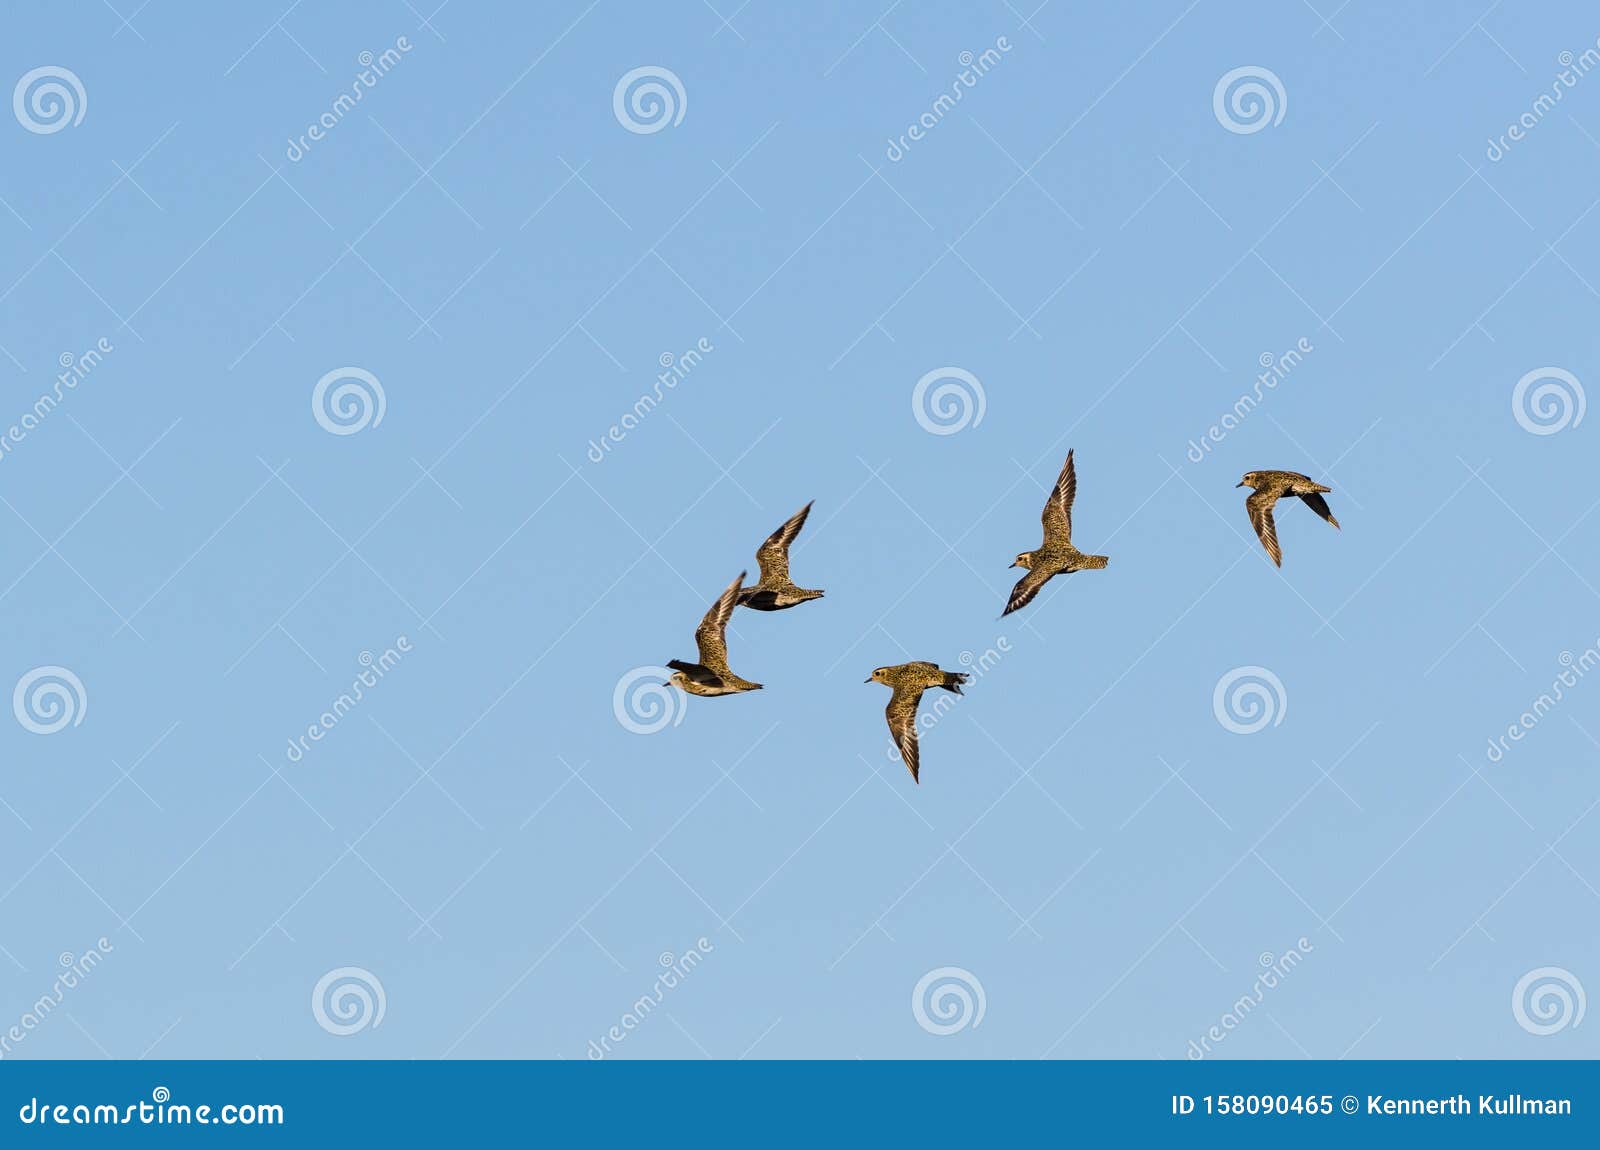 flock with wader birds in flight by fall migration